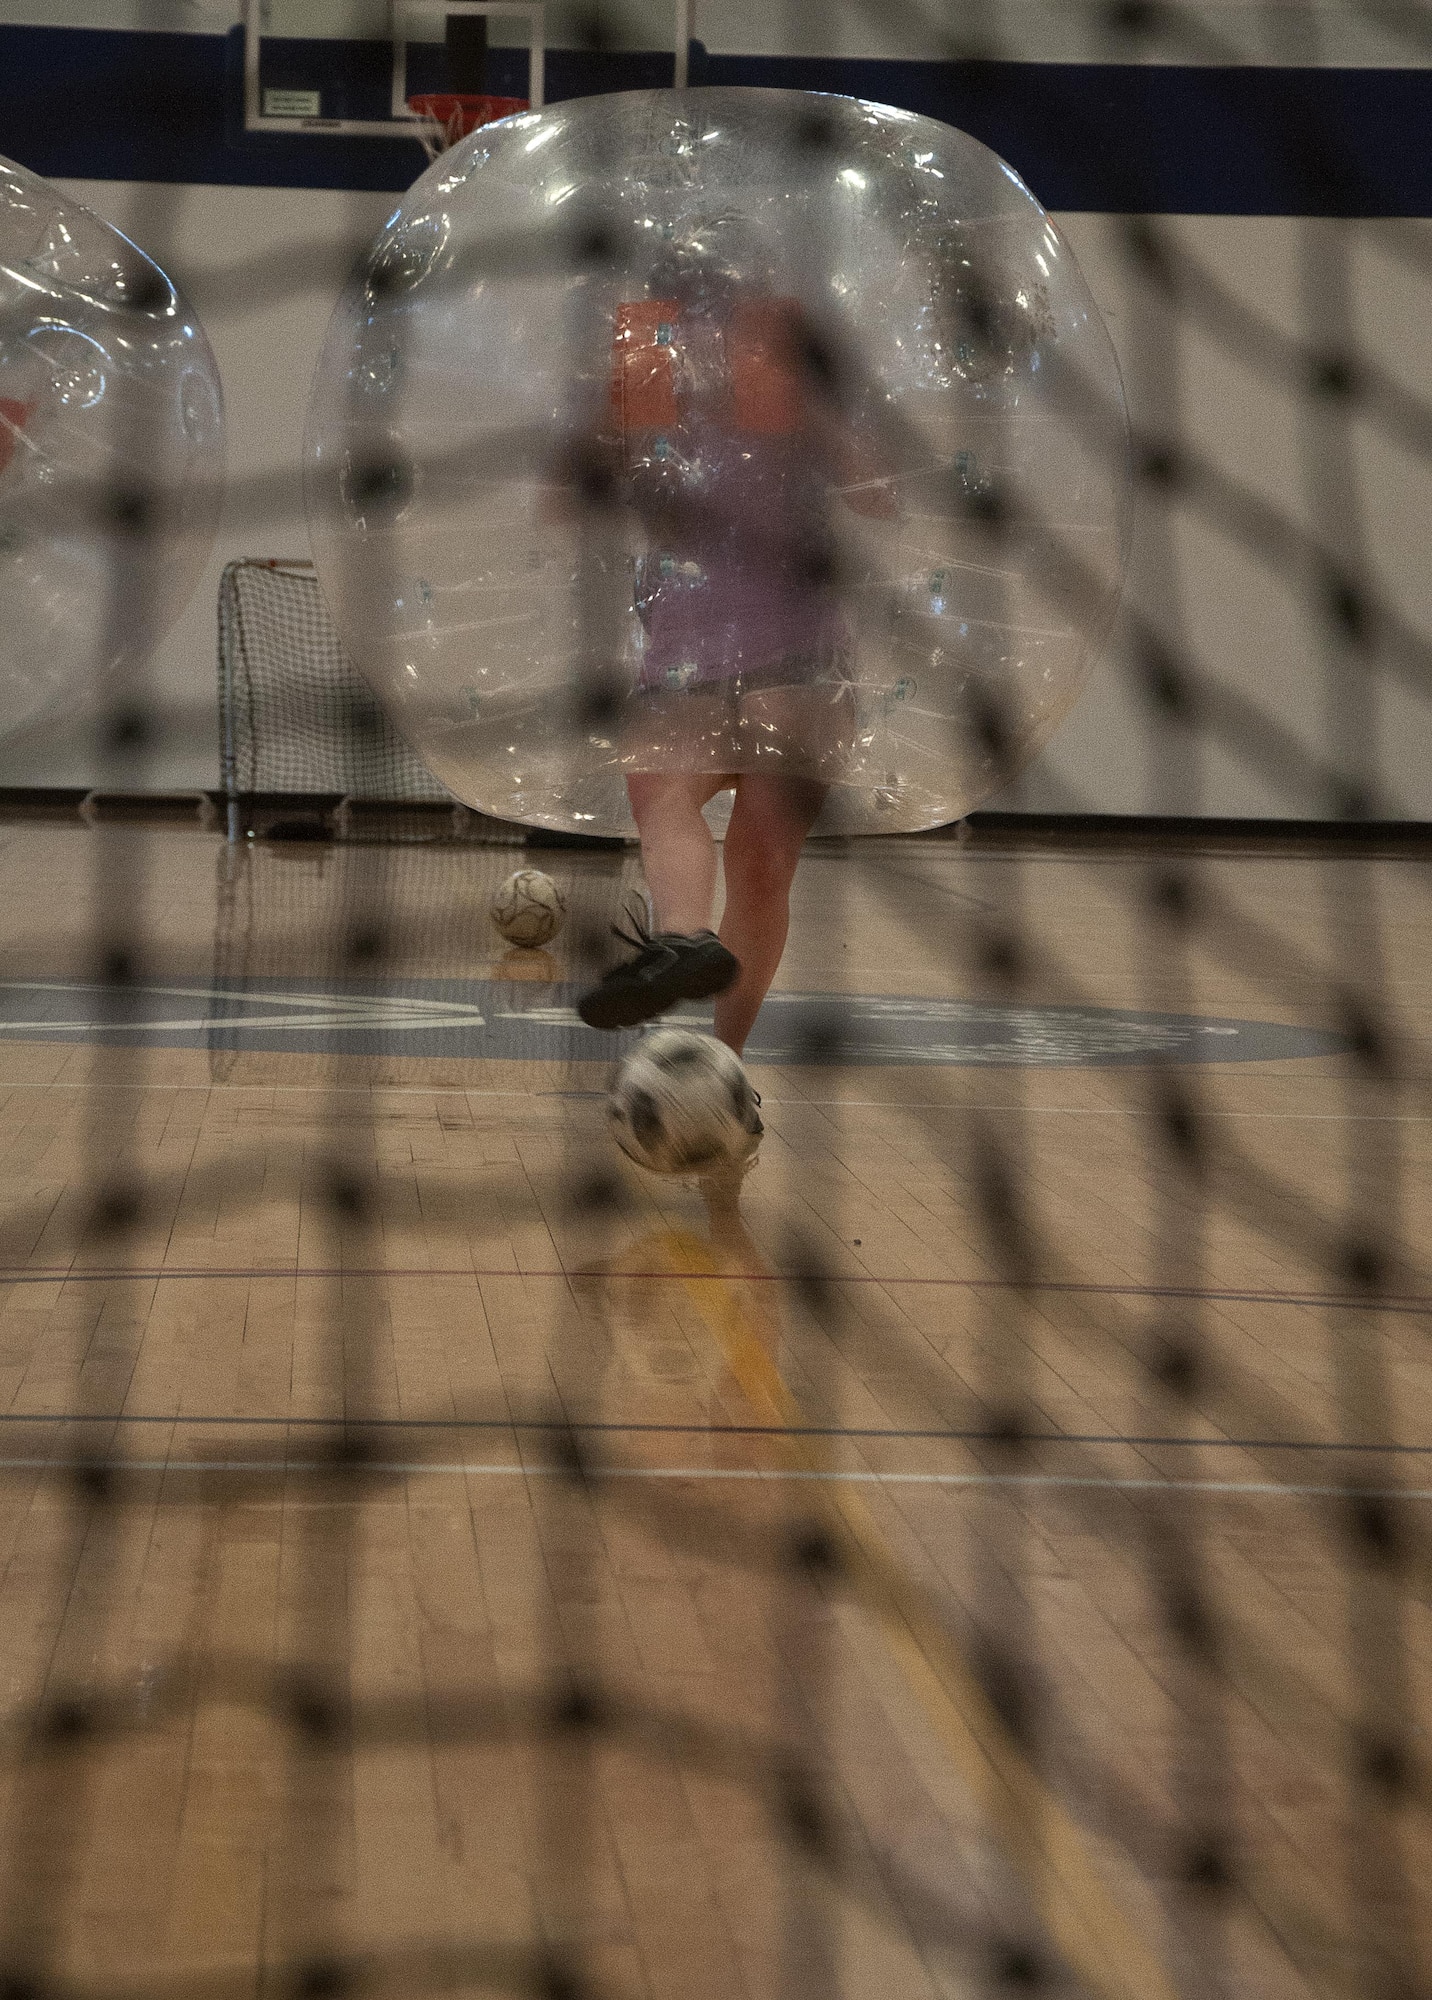 Emily Kiesel shoots a soccer ball towards the goal April 22, 2016, during a bubble soccer Tournament in the Freedom Hall Fitness Center on F.E. Warren Air Force Base, Wyo. In the event of a tie, both teams sent one player to duel for the goal. (U.S. Air Force photo by Senior Airman Brandon Valle)